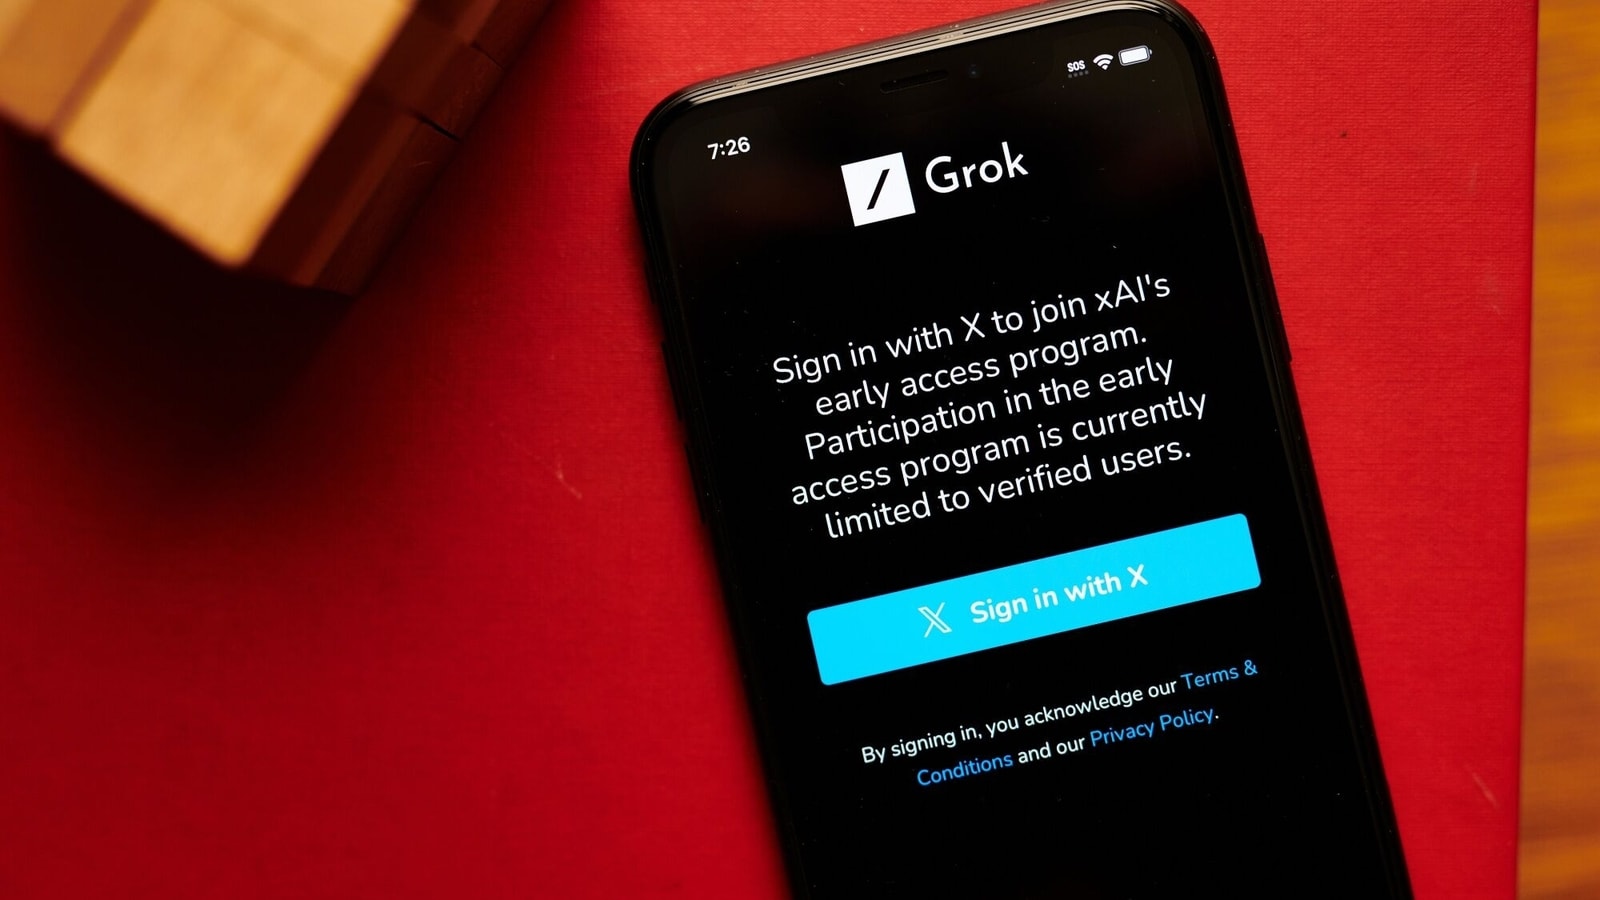 Grok chatbot, now available to Premium subscribers